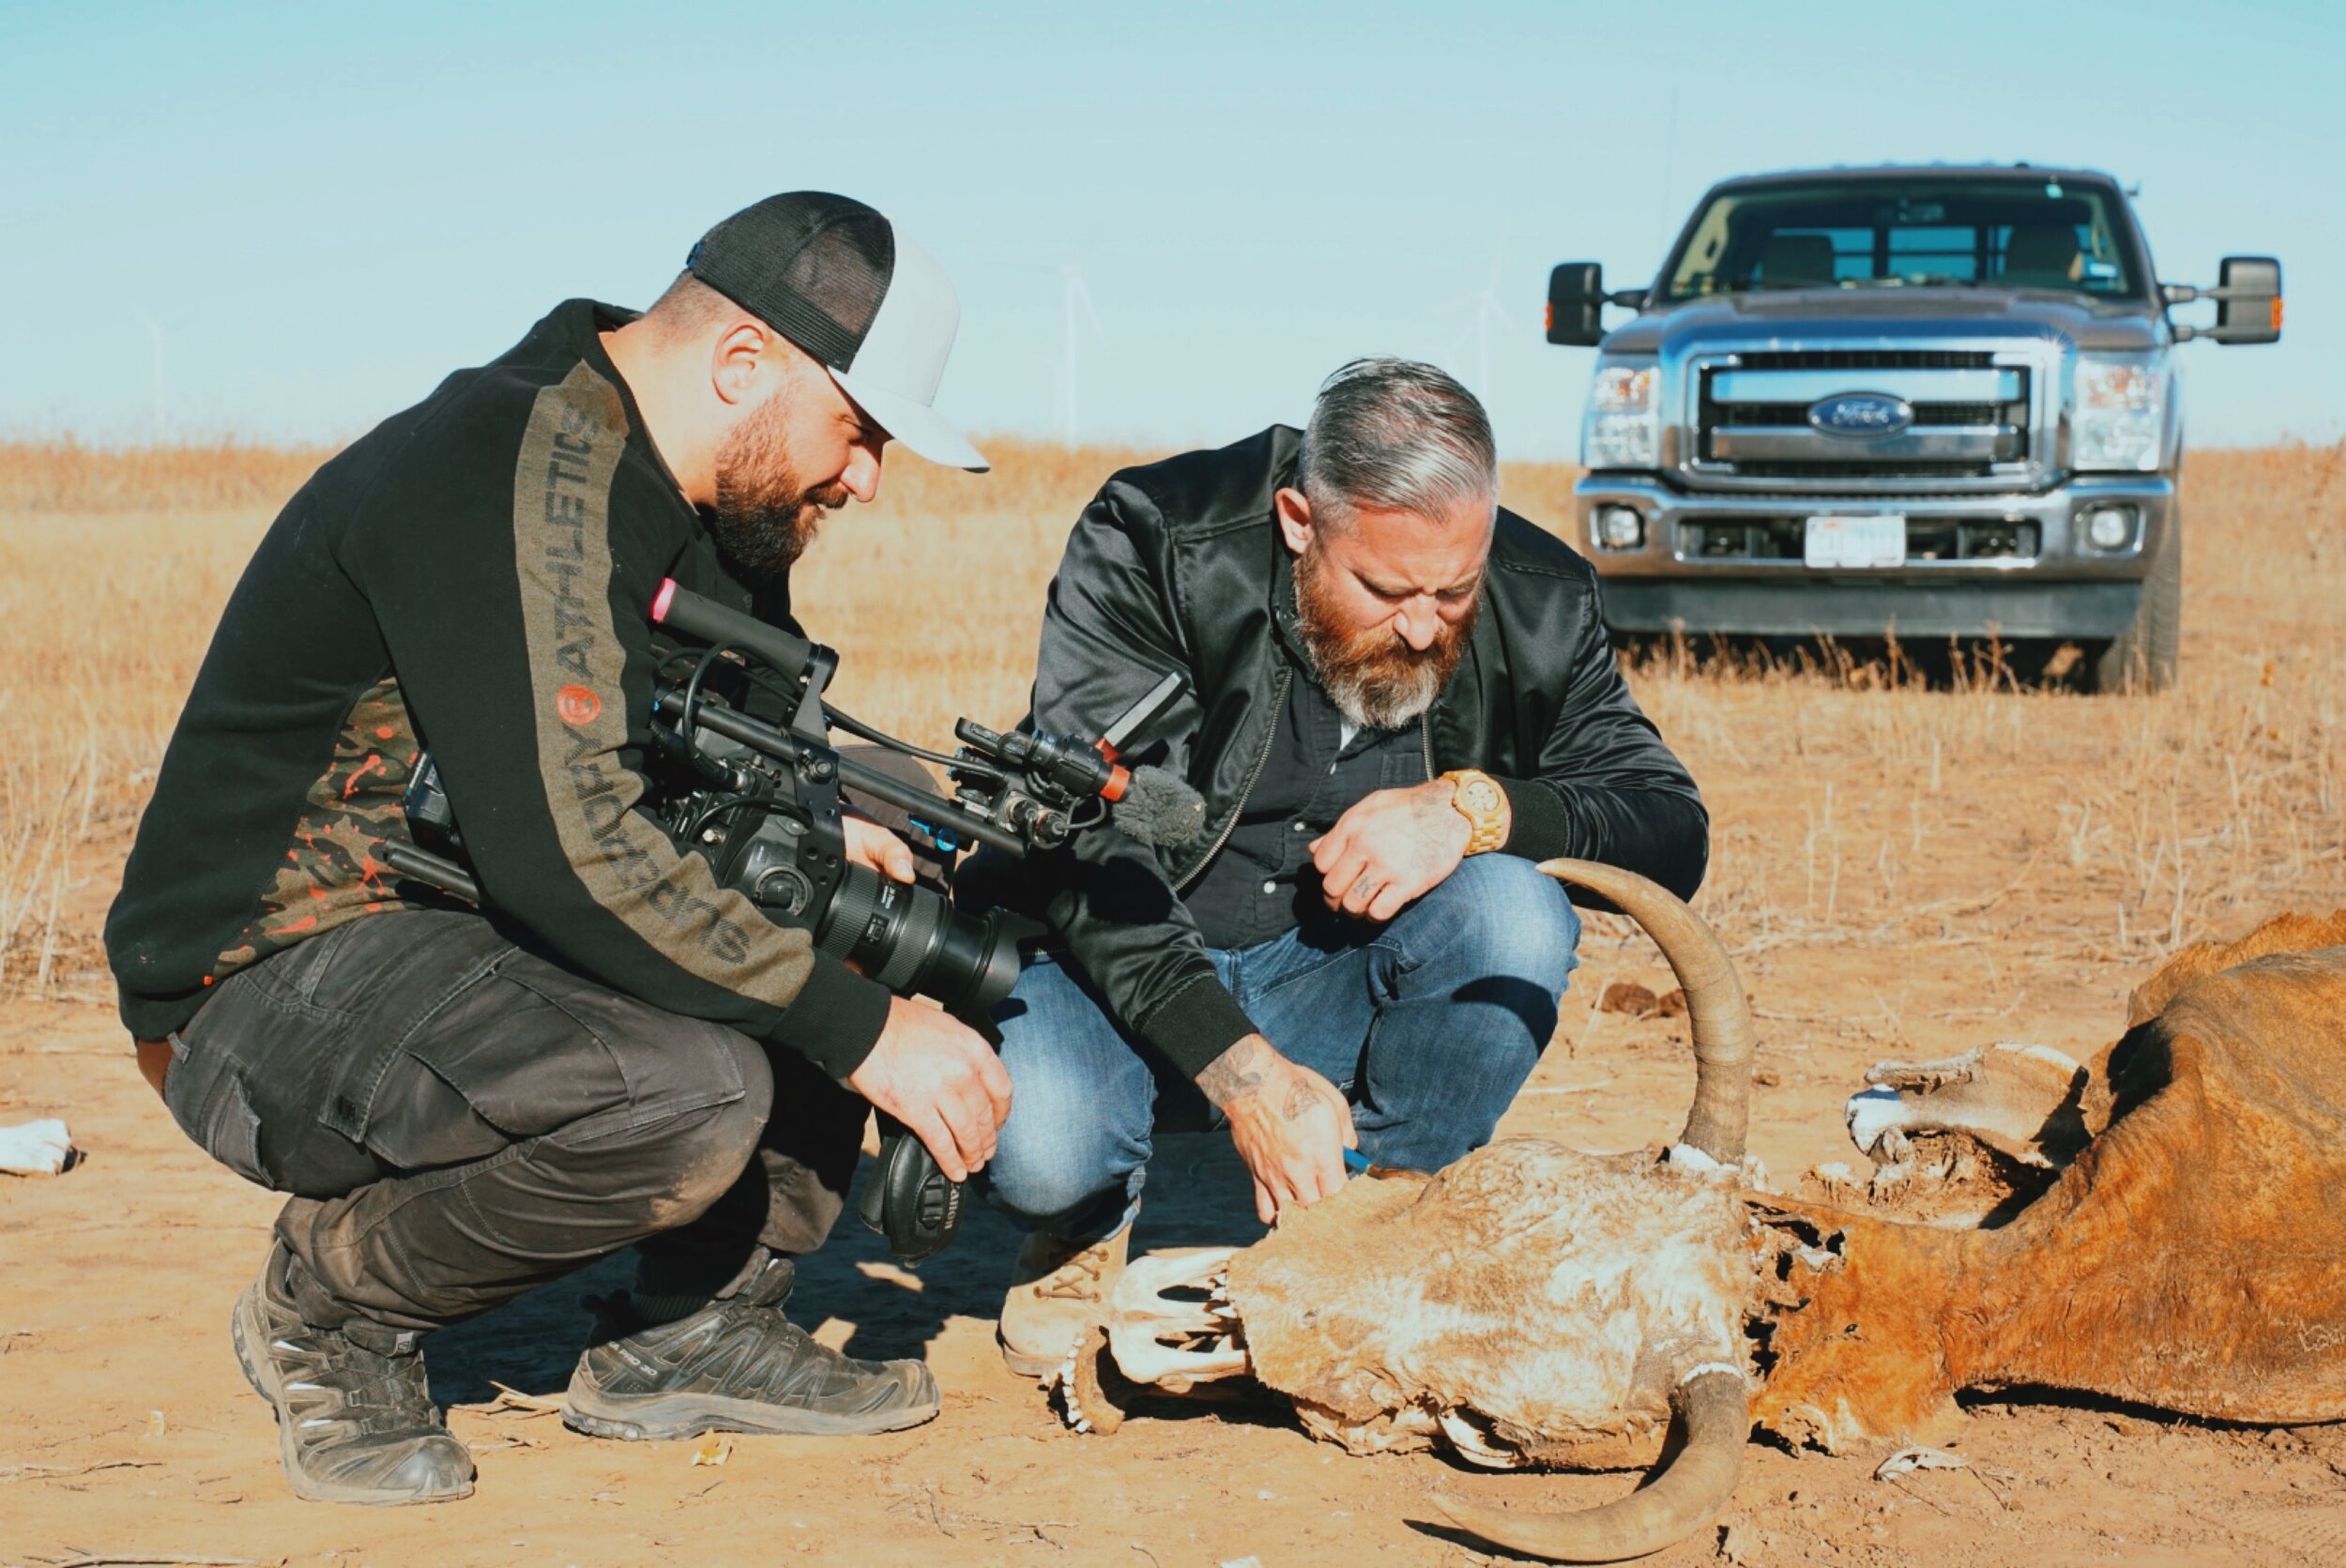  Jeremy (R) and his videographer investigating the cattle mutilation in the Texas panhandle 